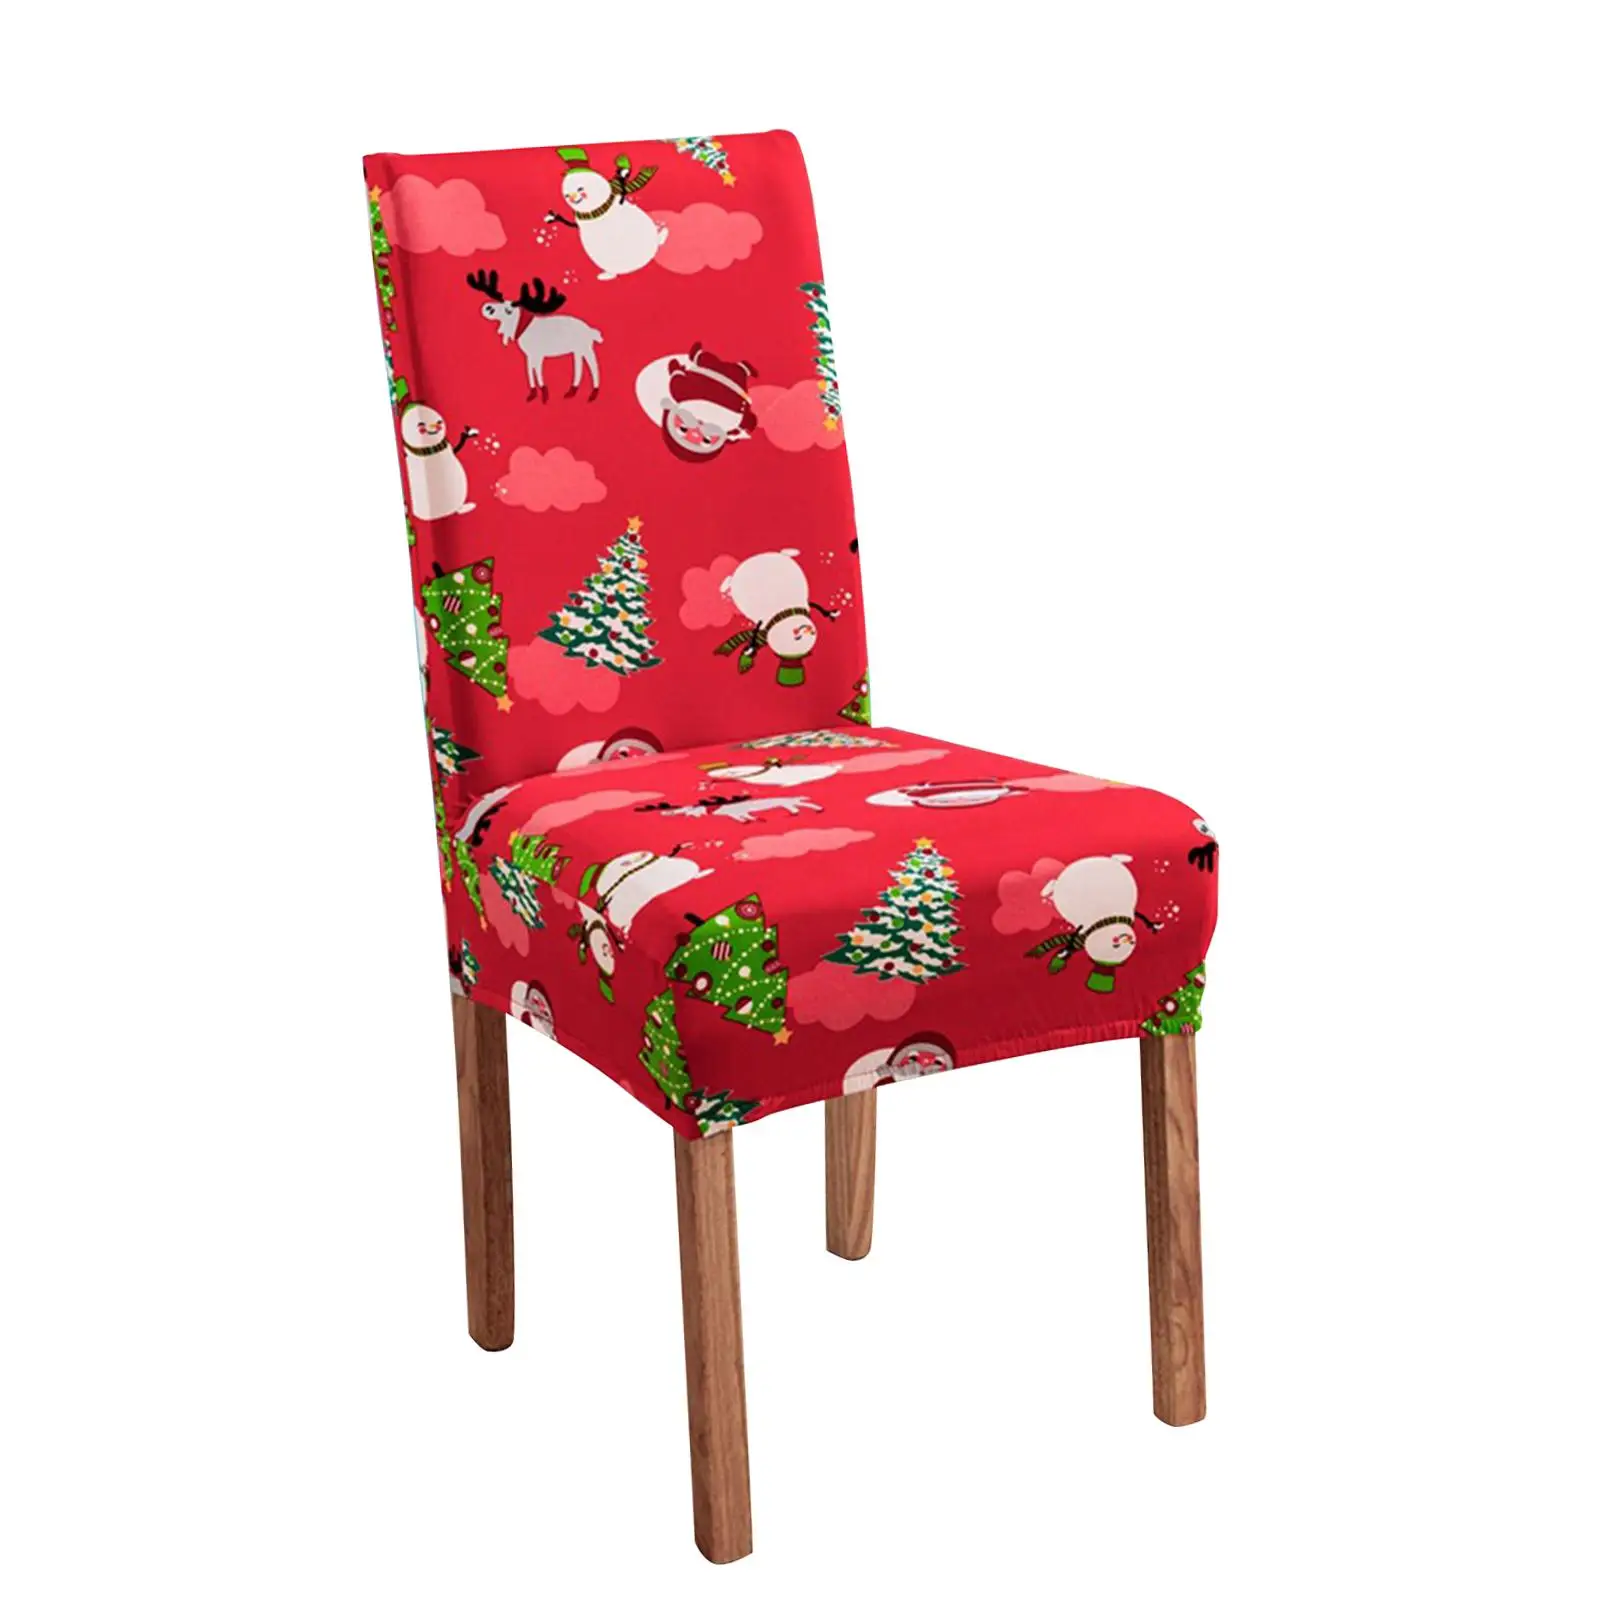 Universal Dining Chair Cover Chair Slipcover Washable for Living Room Bedroom Restaurant Christmas Party